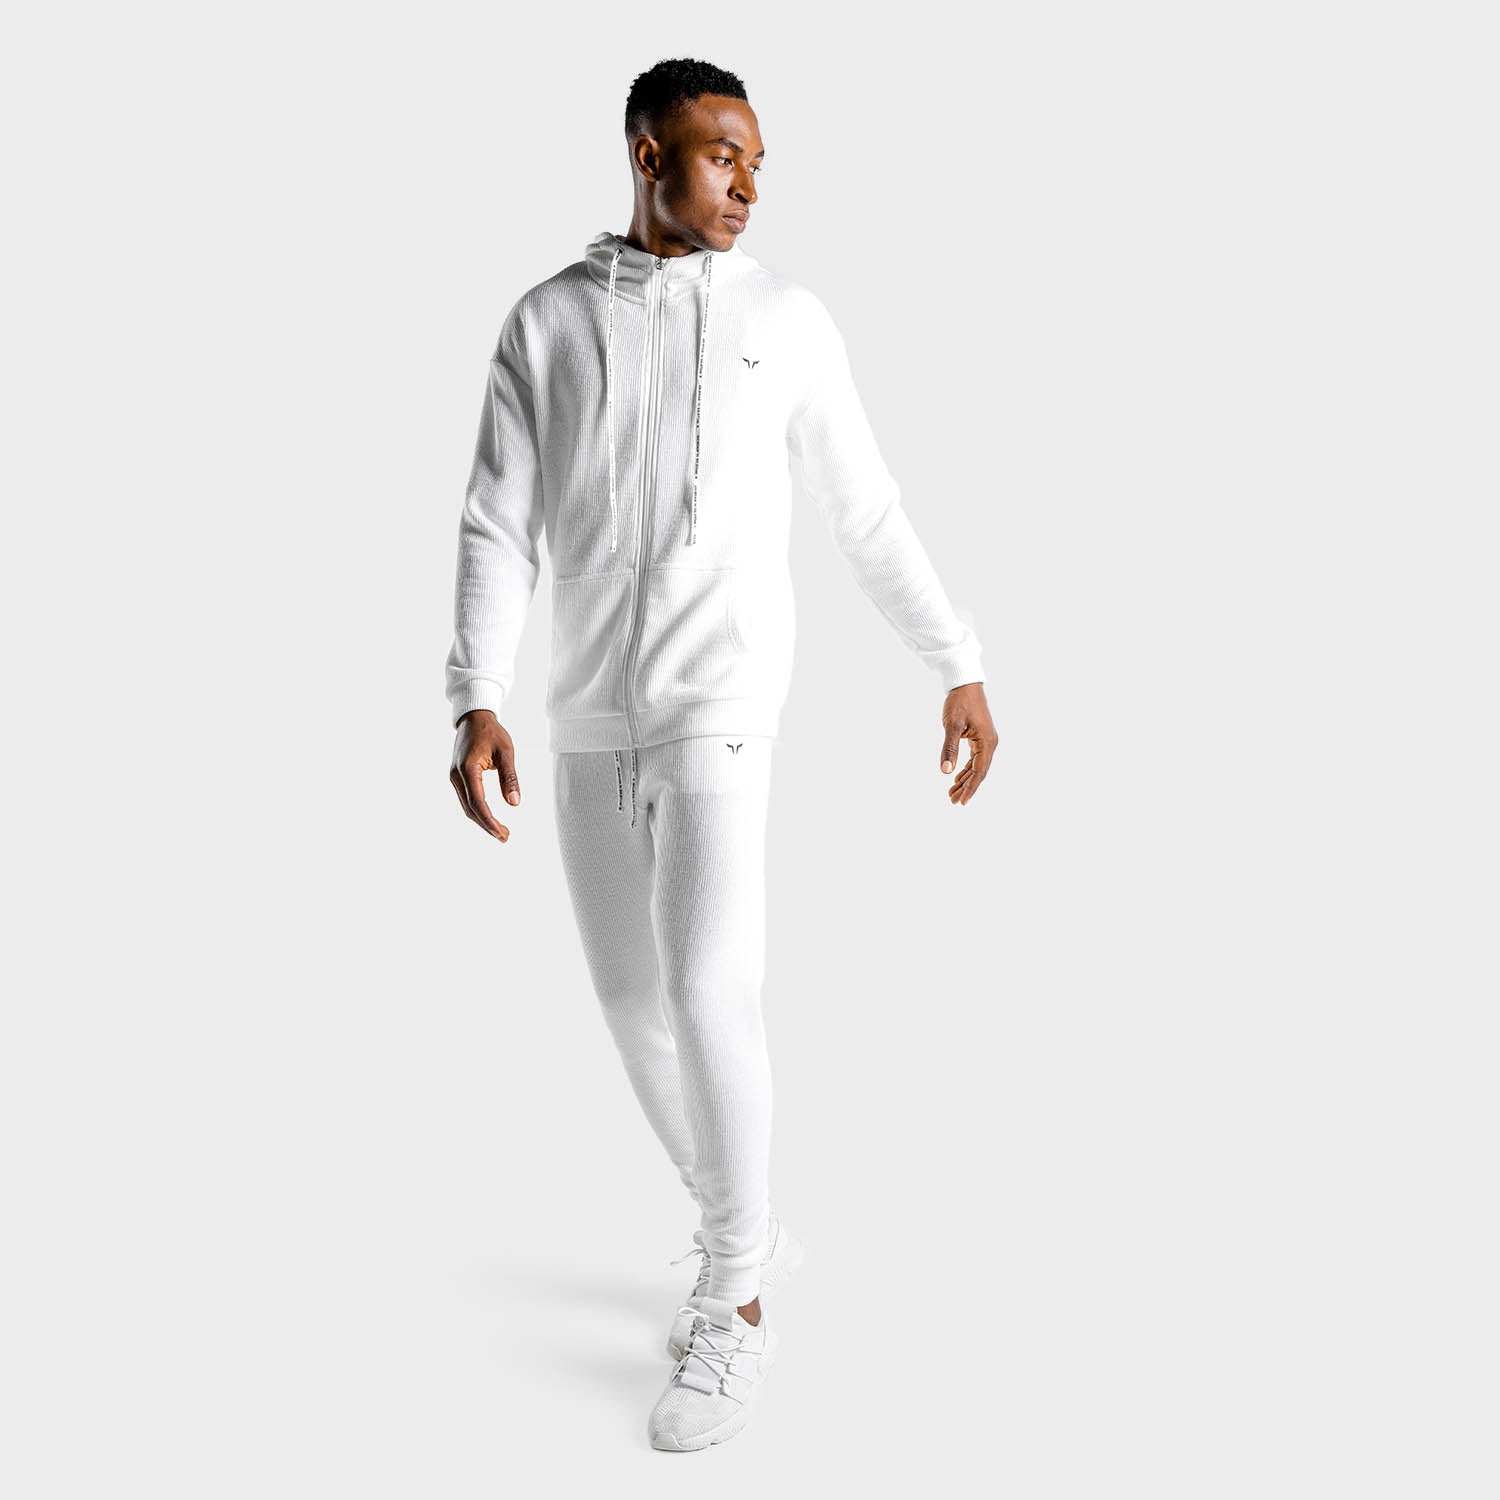 squatwolf-workout-hoodies-for-men-luxe-zip-up-white-gym-wear